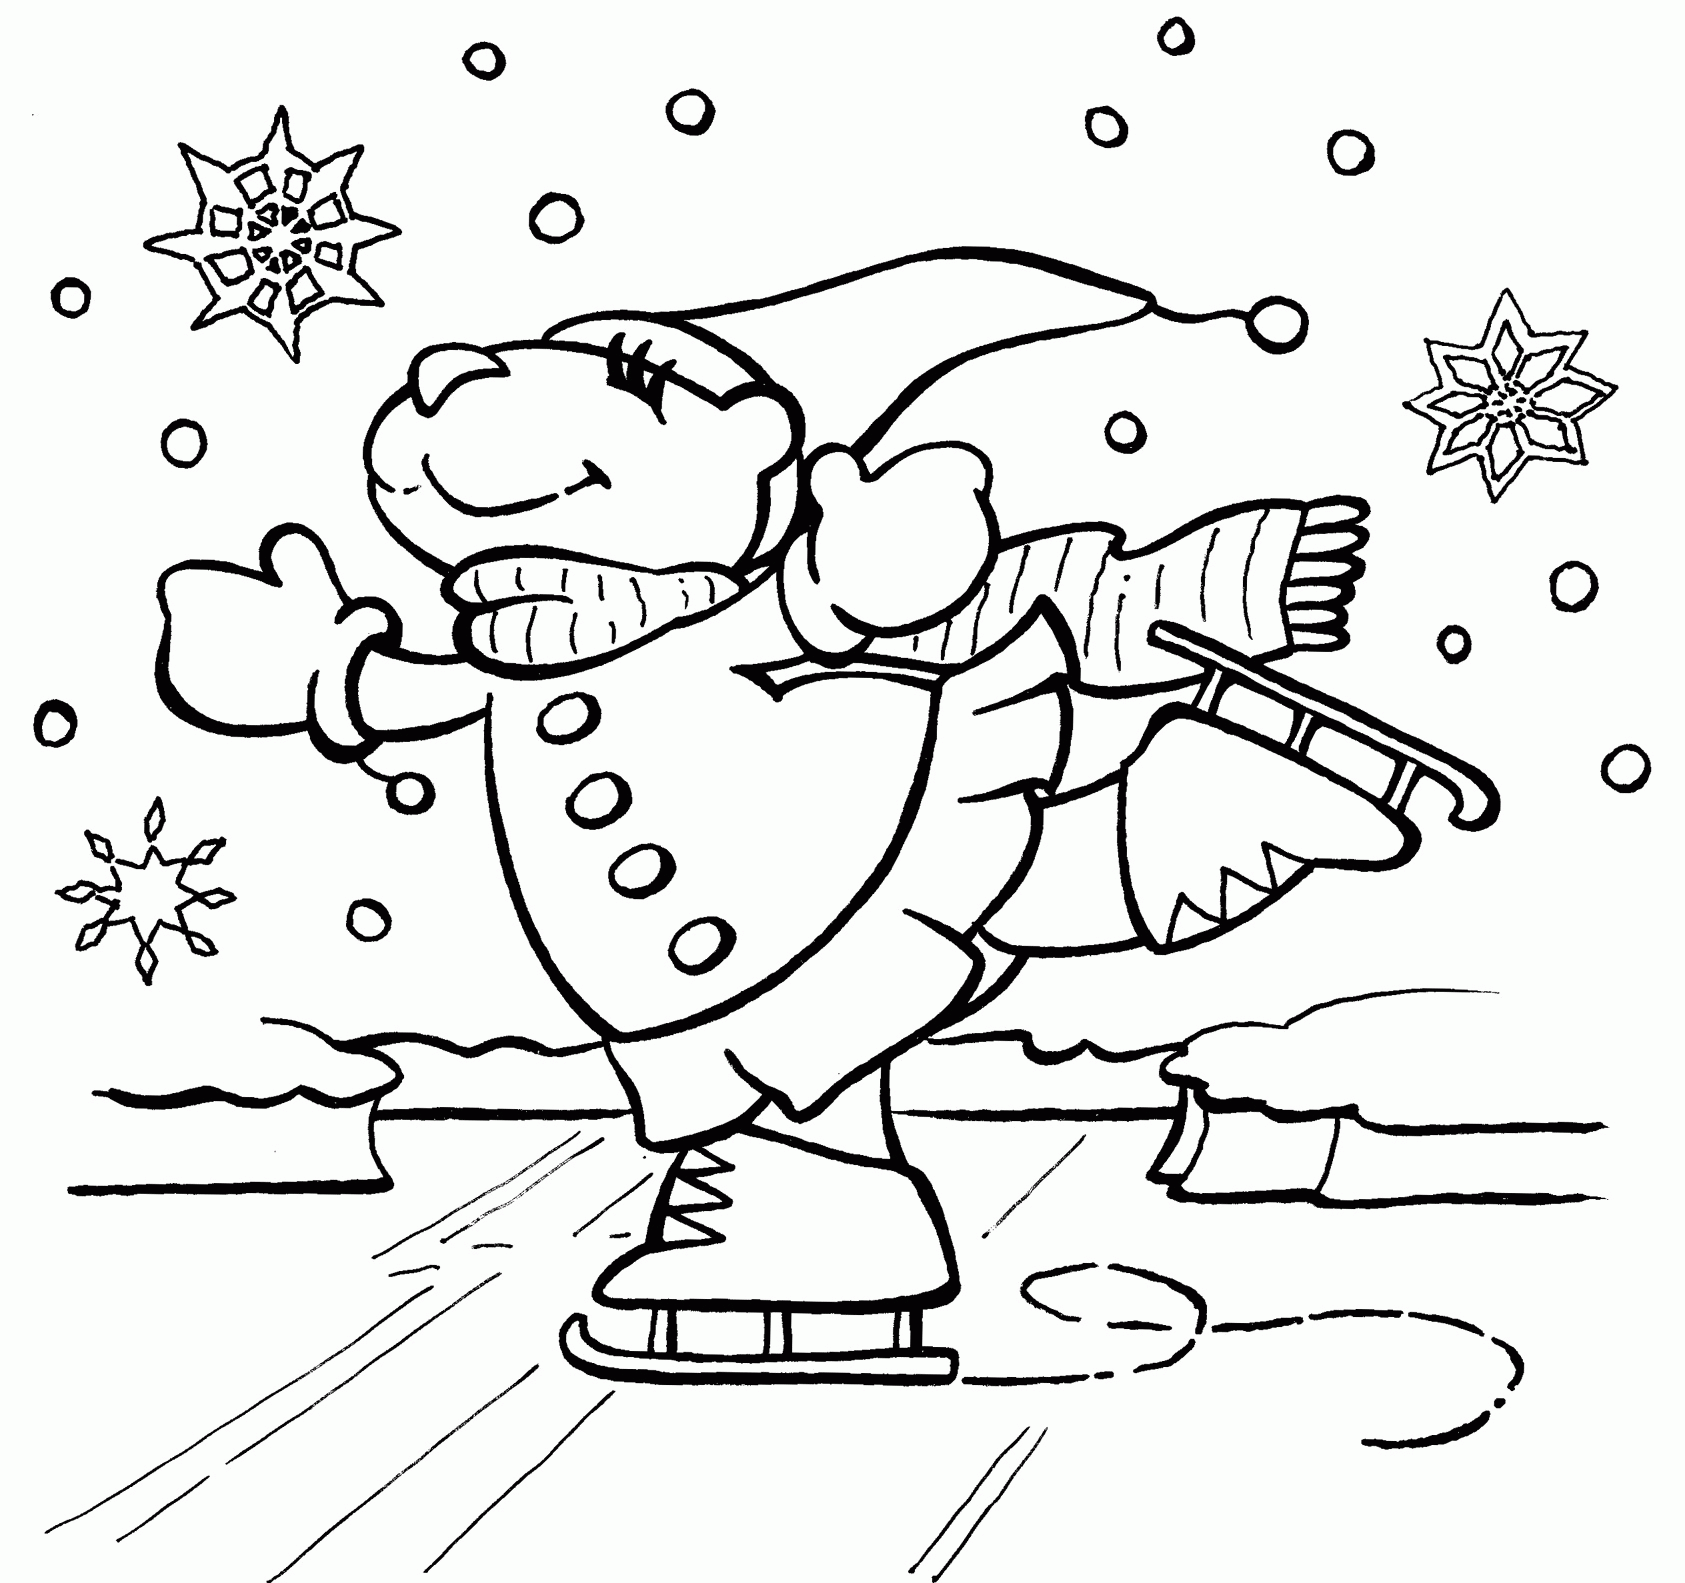 Free Coloring Pages Winter Scenes   Coloring Page   Coloring Home